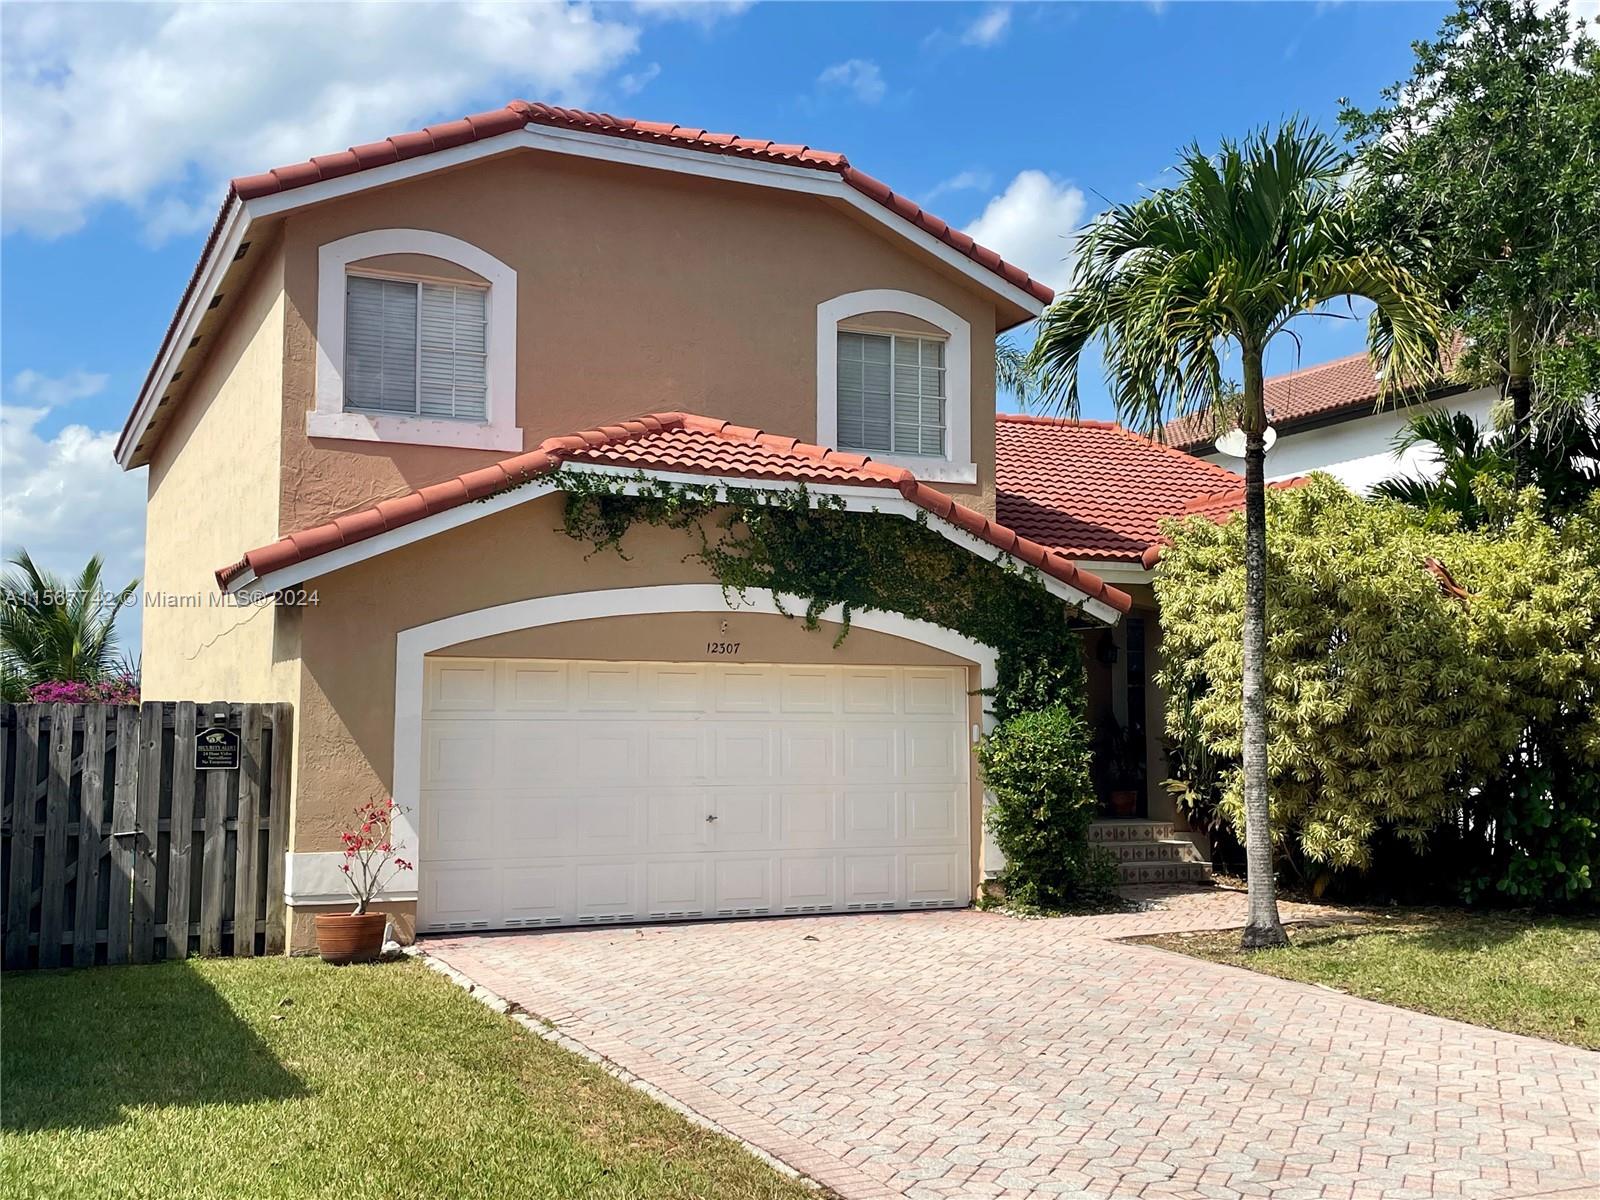 Property for Sale at 12307 Sw 143rd Ln Ln, Miami, Broward County, Florida - Bedrooms: 4 
Bathrooms: 3  - $849,000